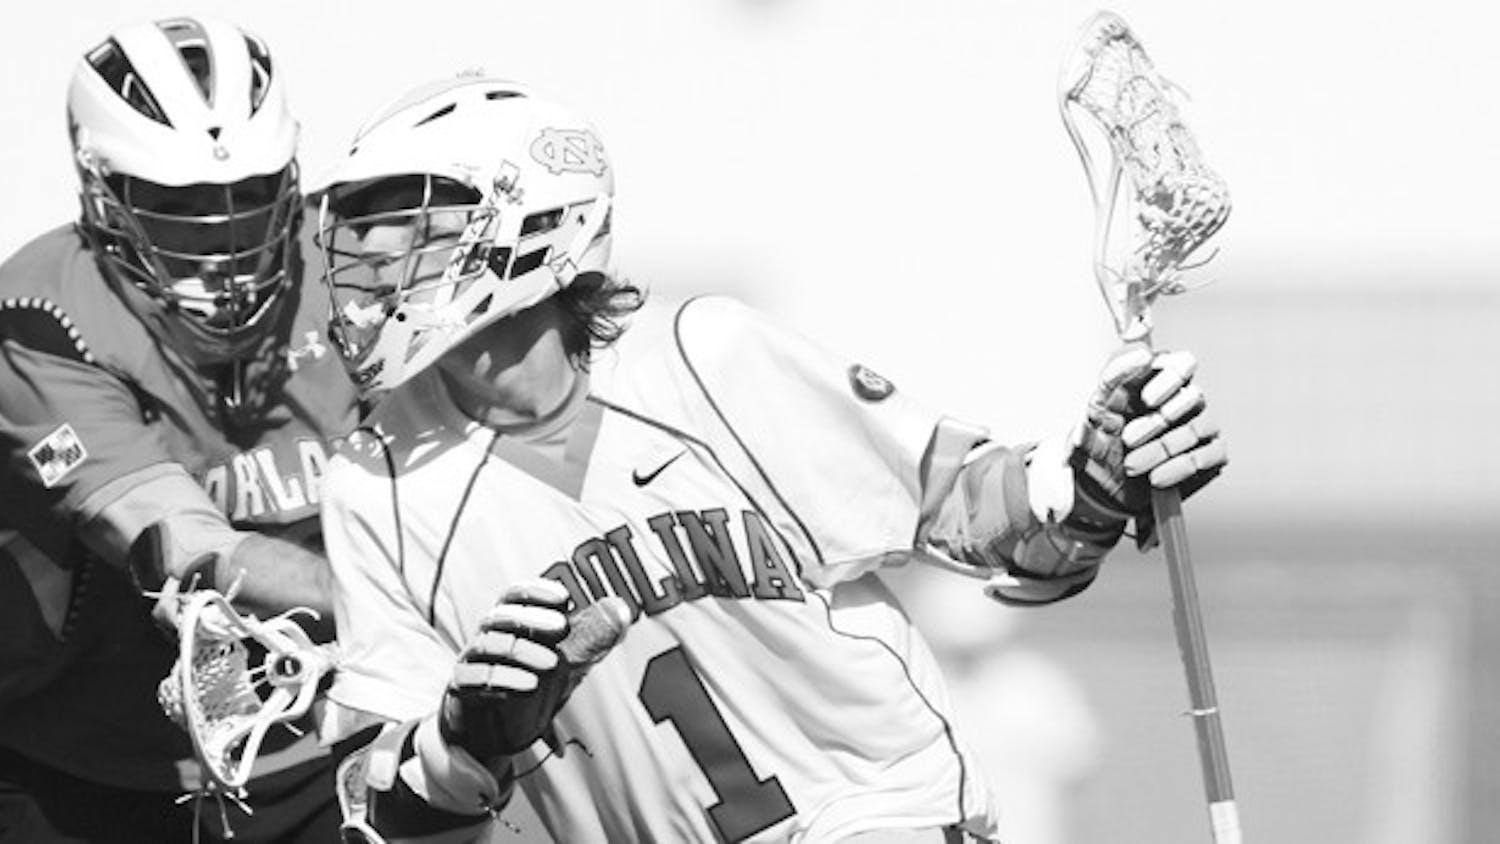 Freshman Marcus Holman has stepped in for injured All-American Billy Bitter on the men's lacrosse team. DTH File/Phong Dinh